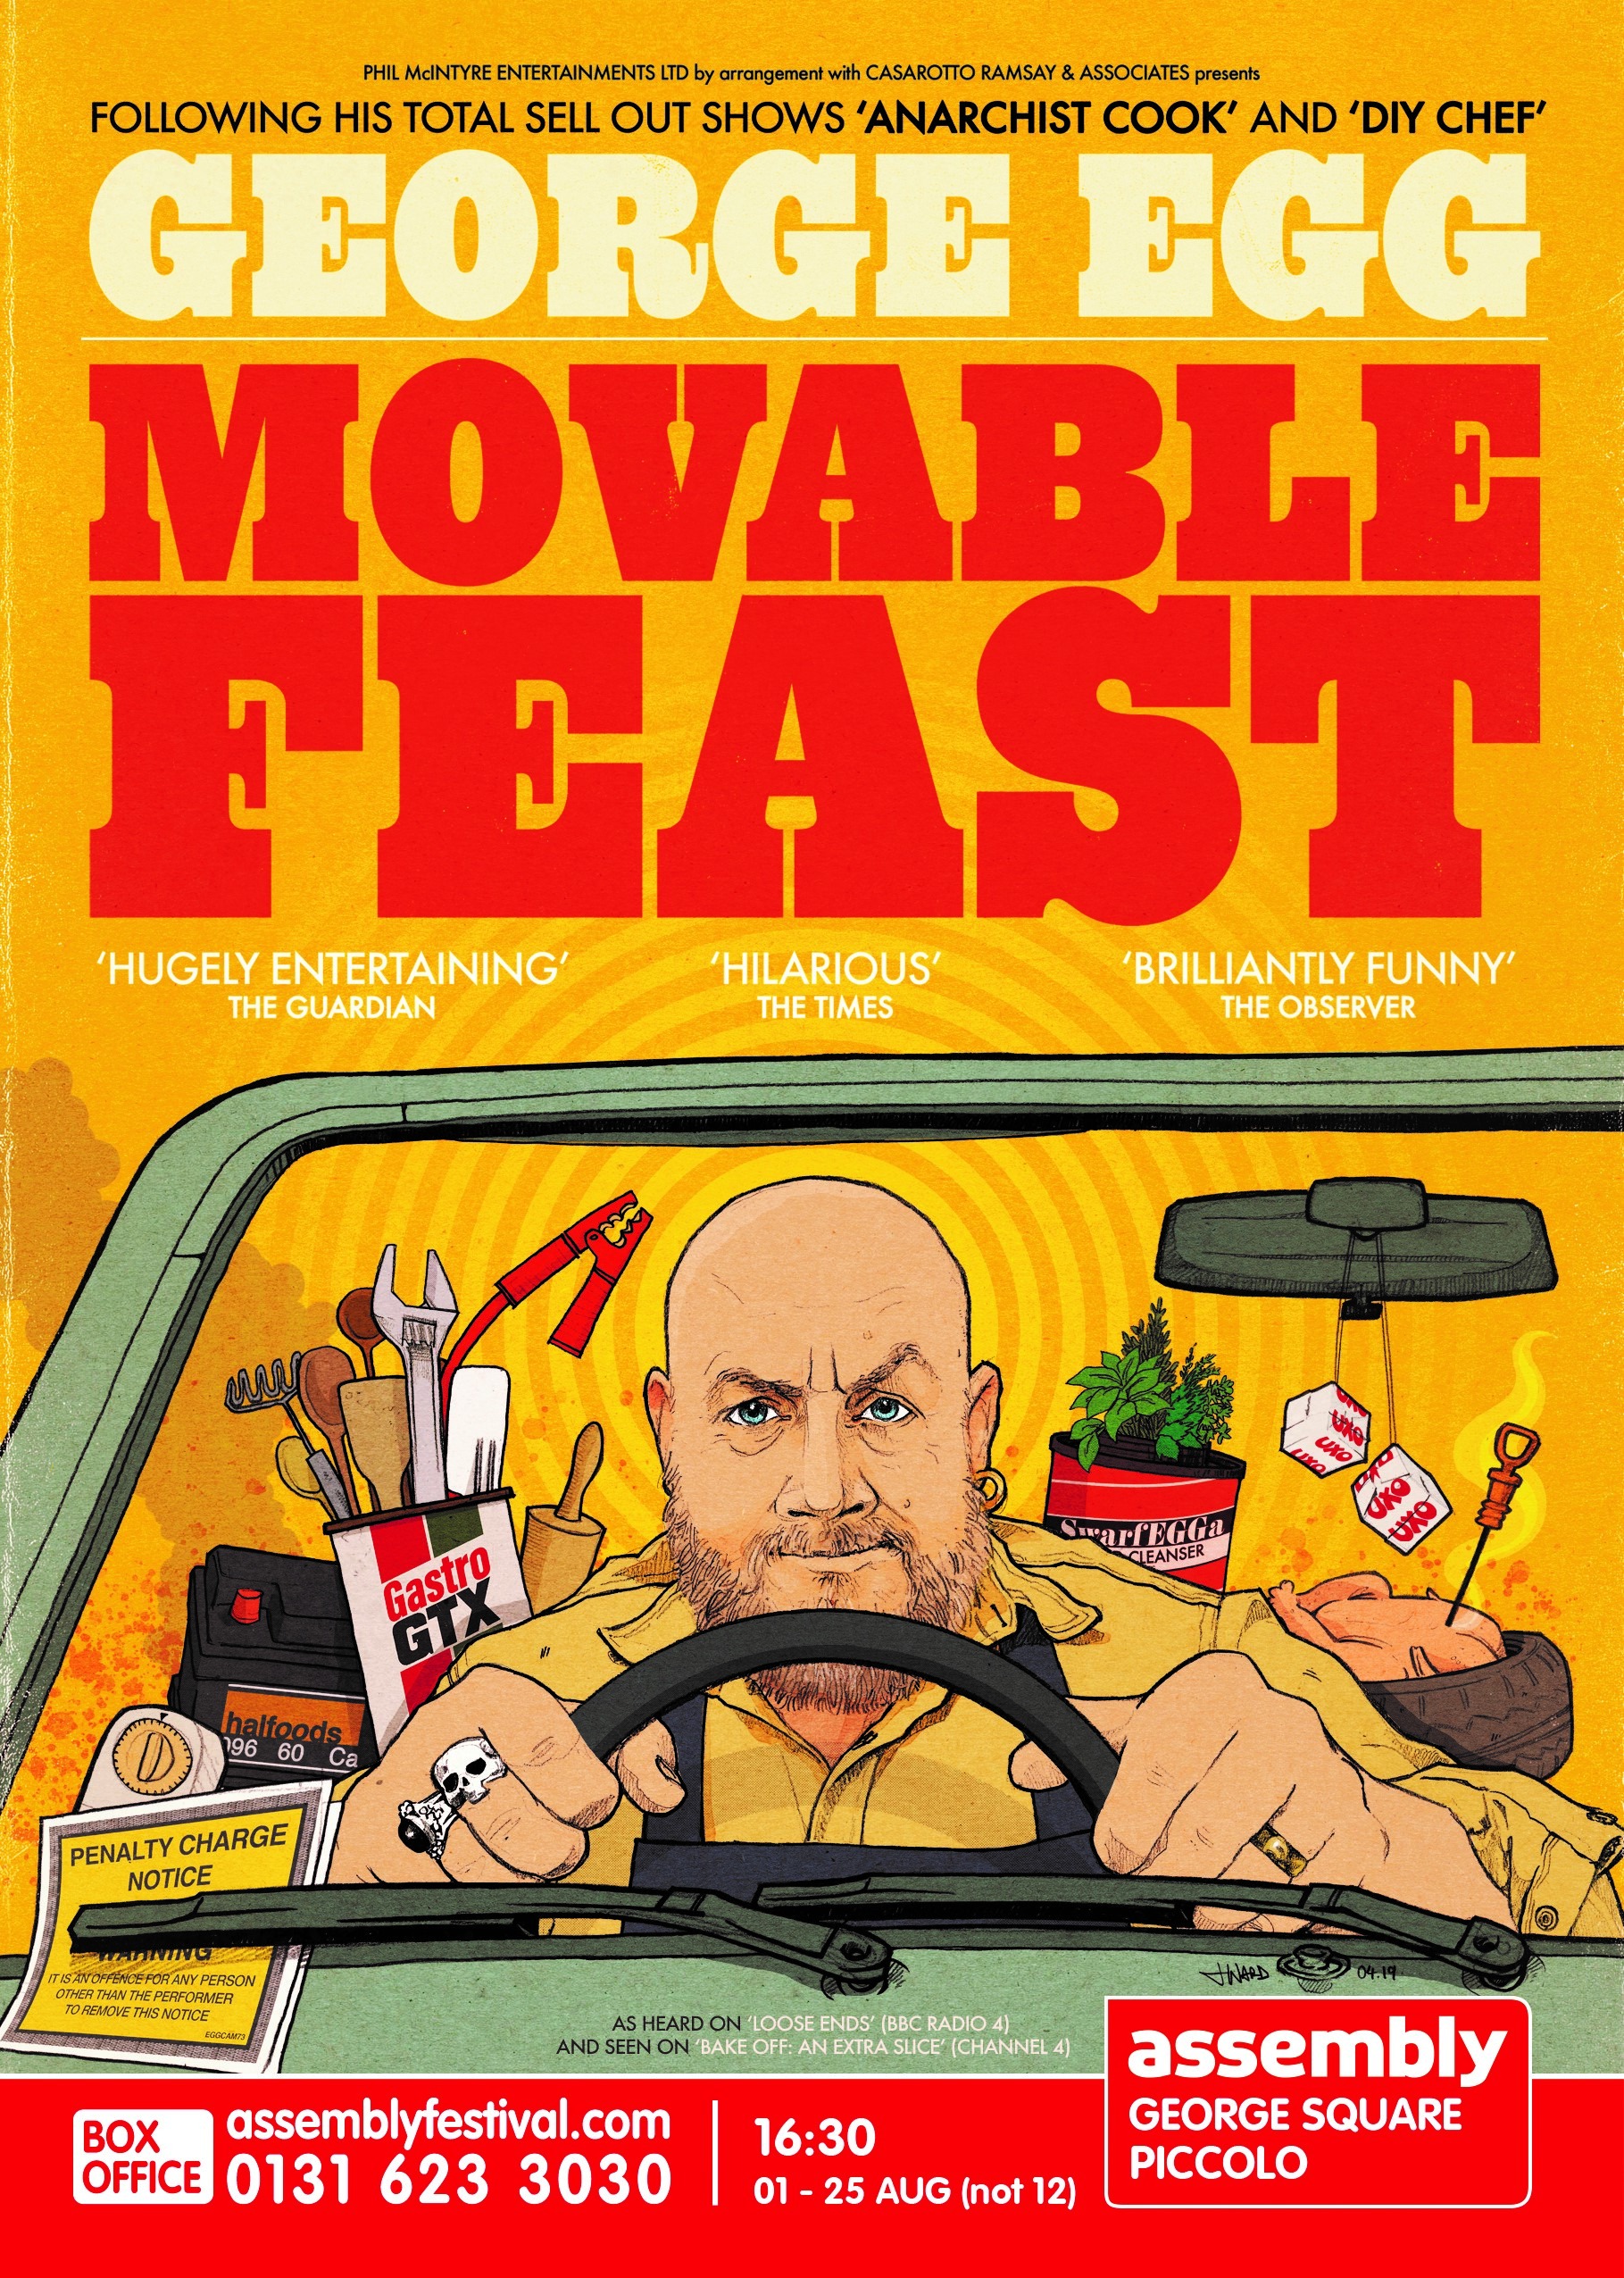 The poster for George Egg: Movable Feast